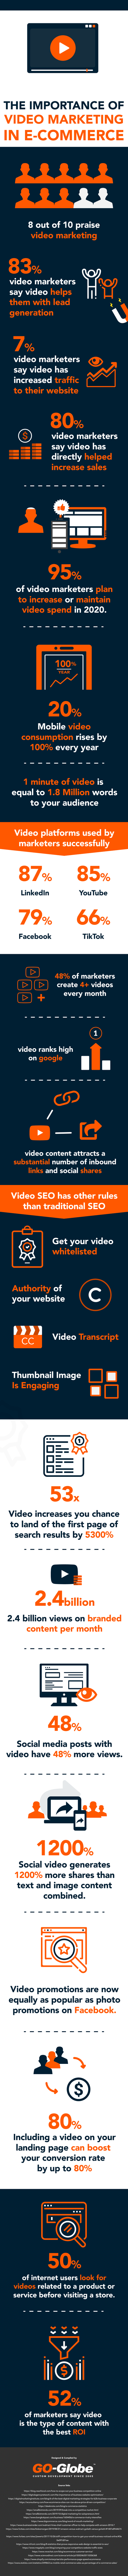 The importance of video marketing in eCommerce #infographic